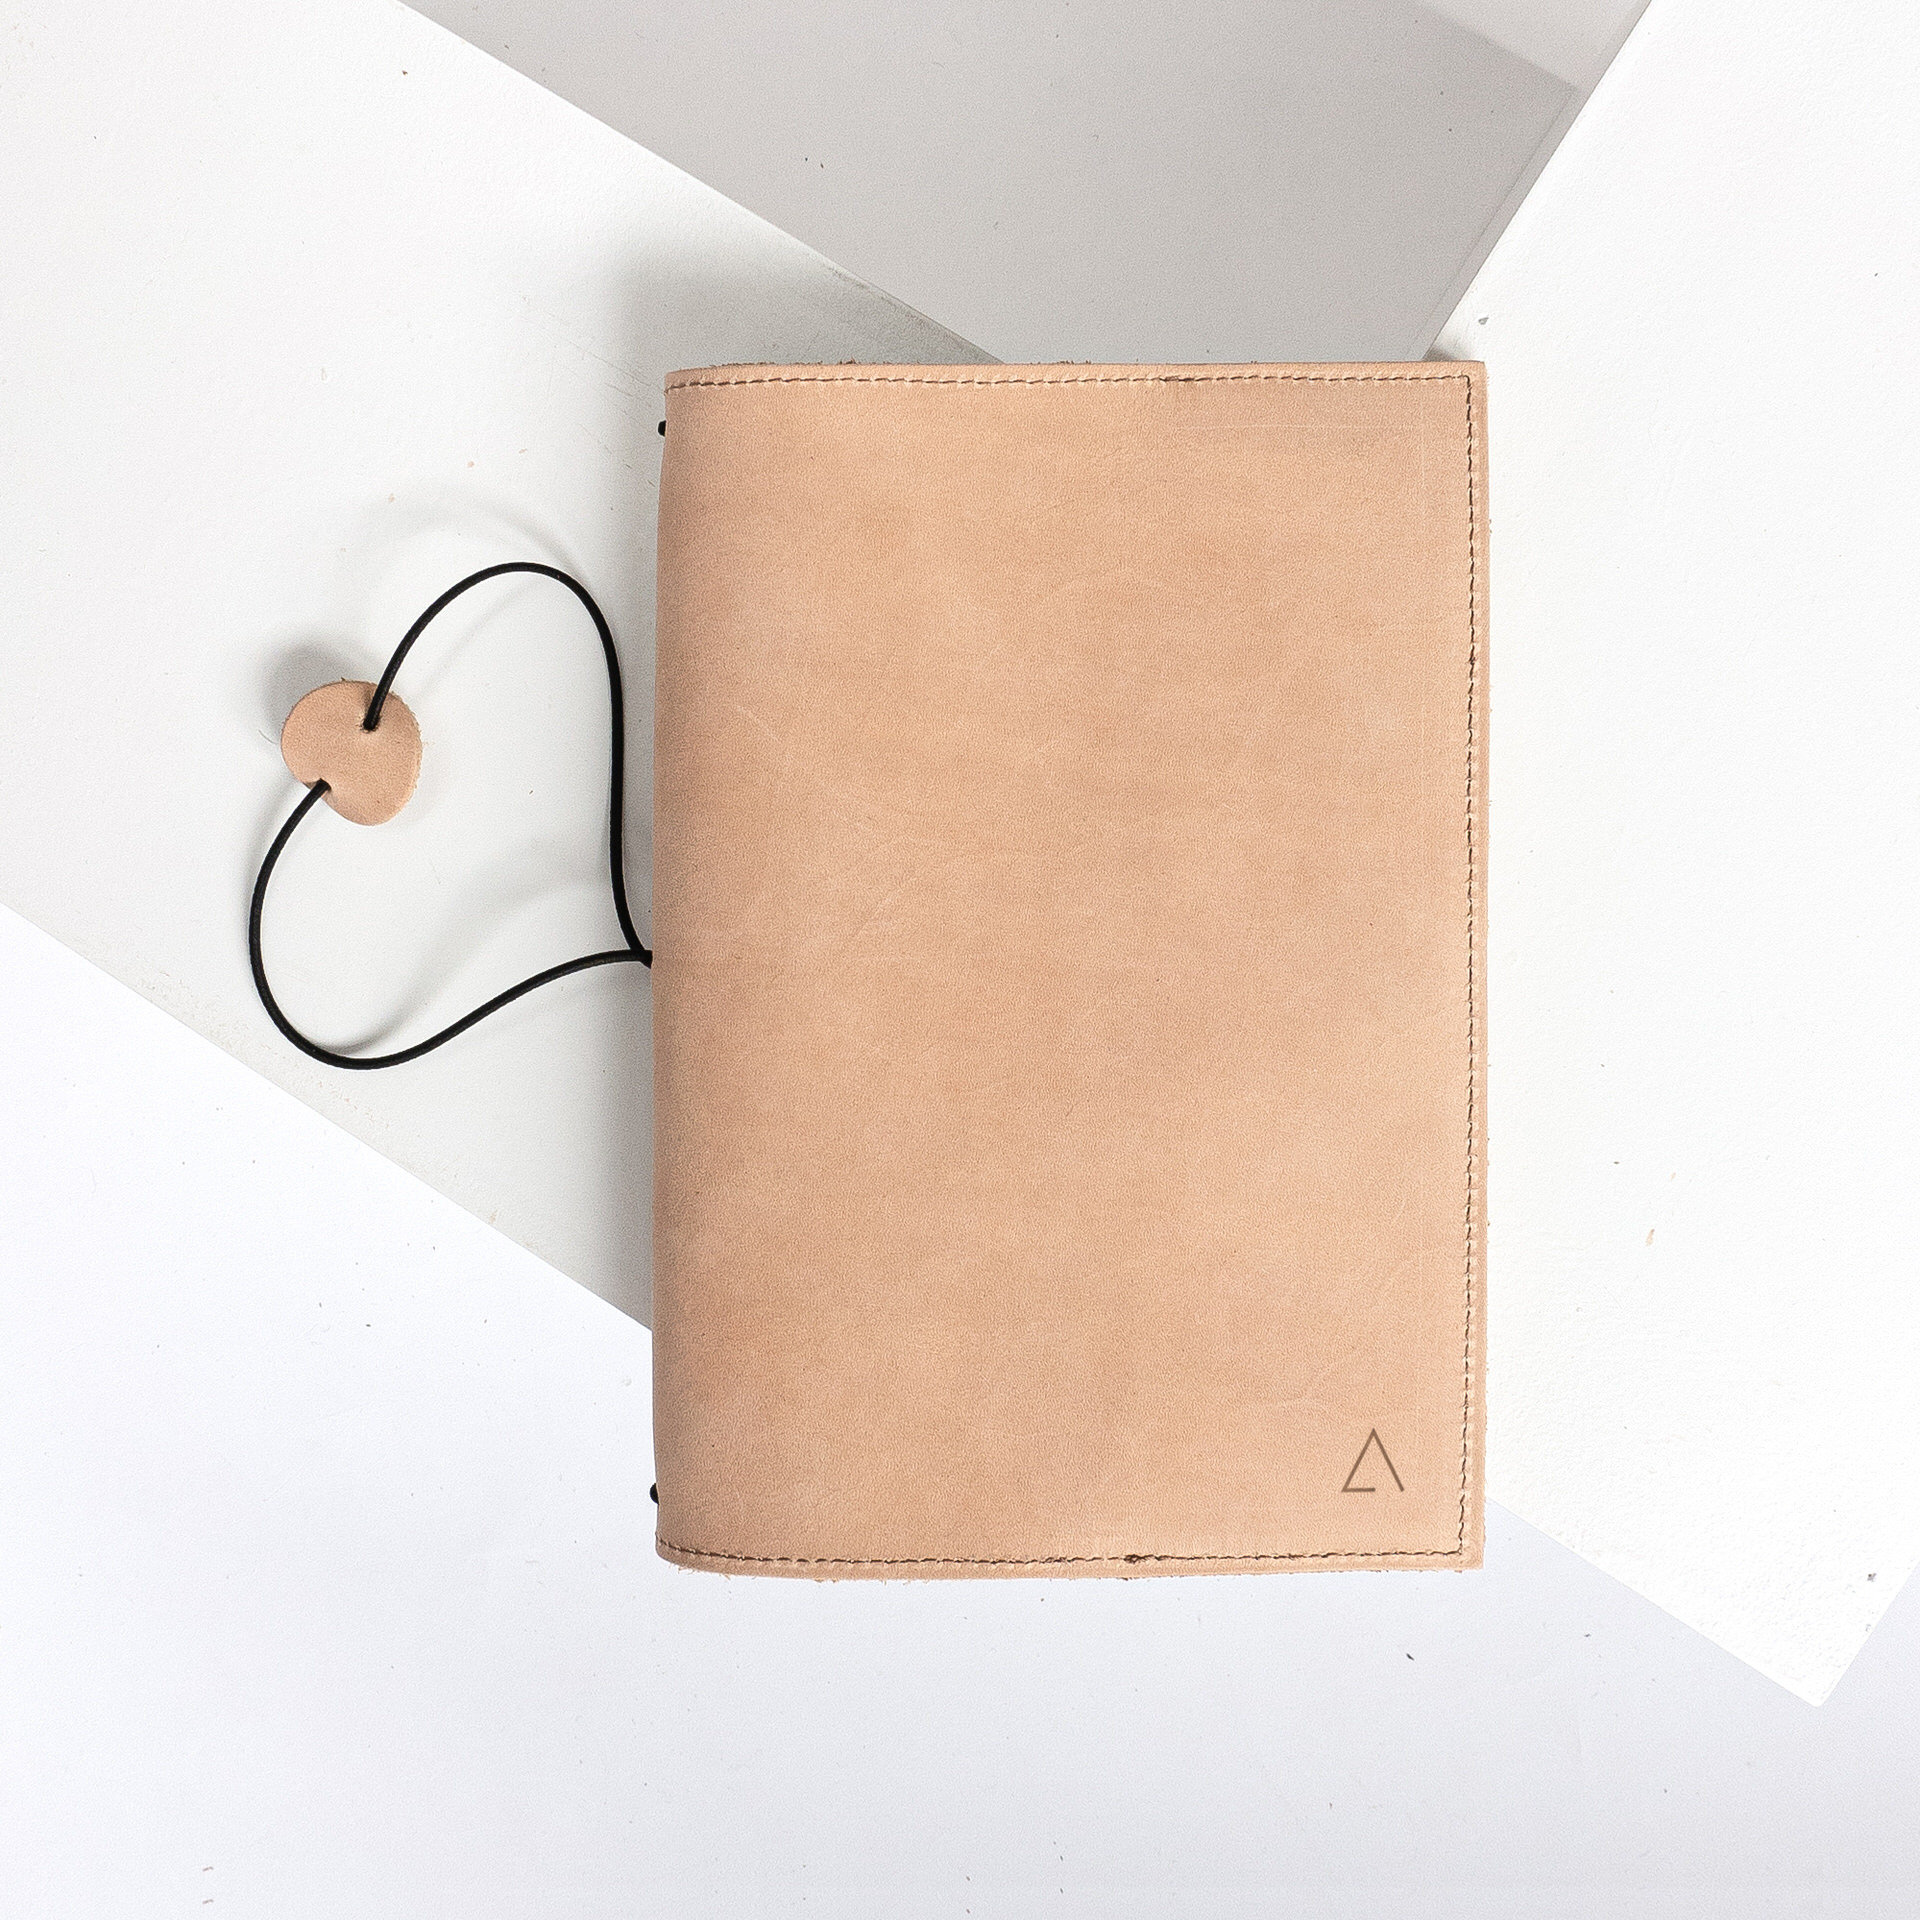 Notebook cover NOA A5 in the color light brown.